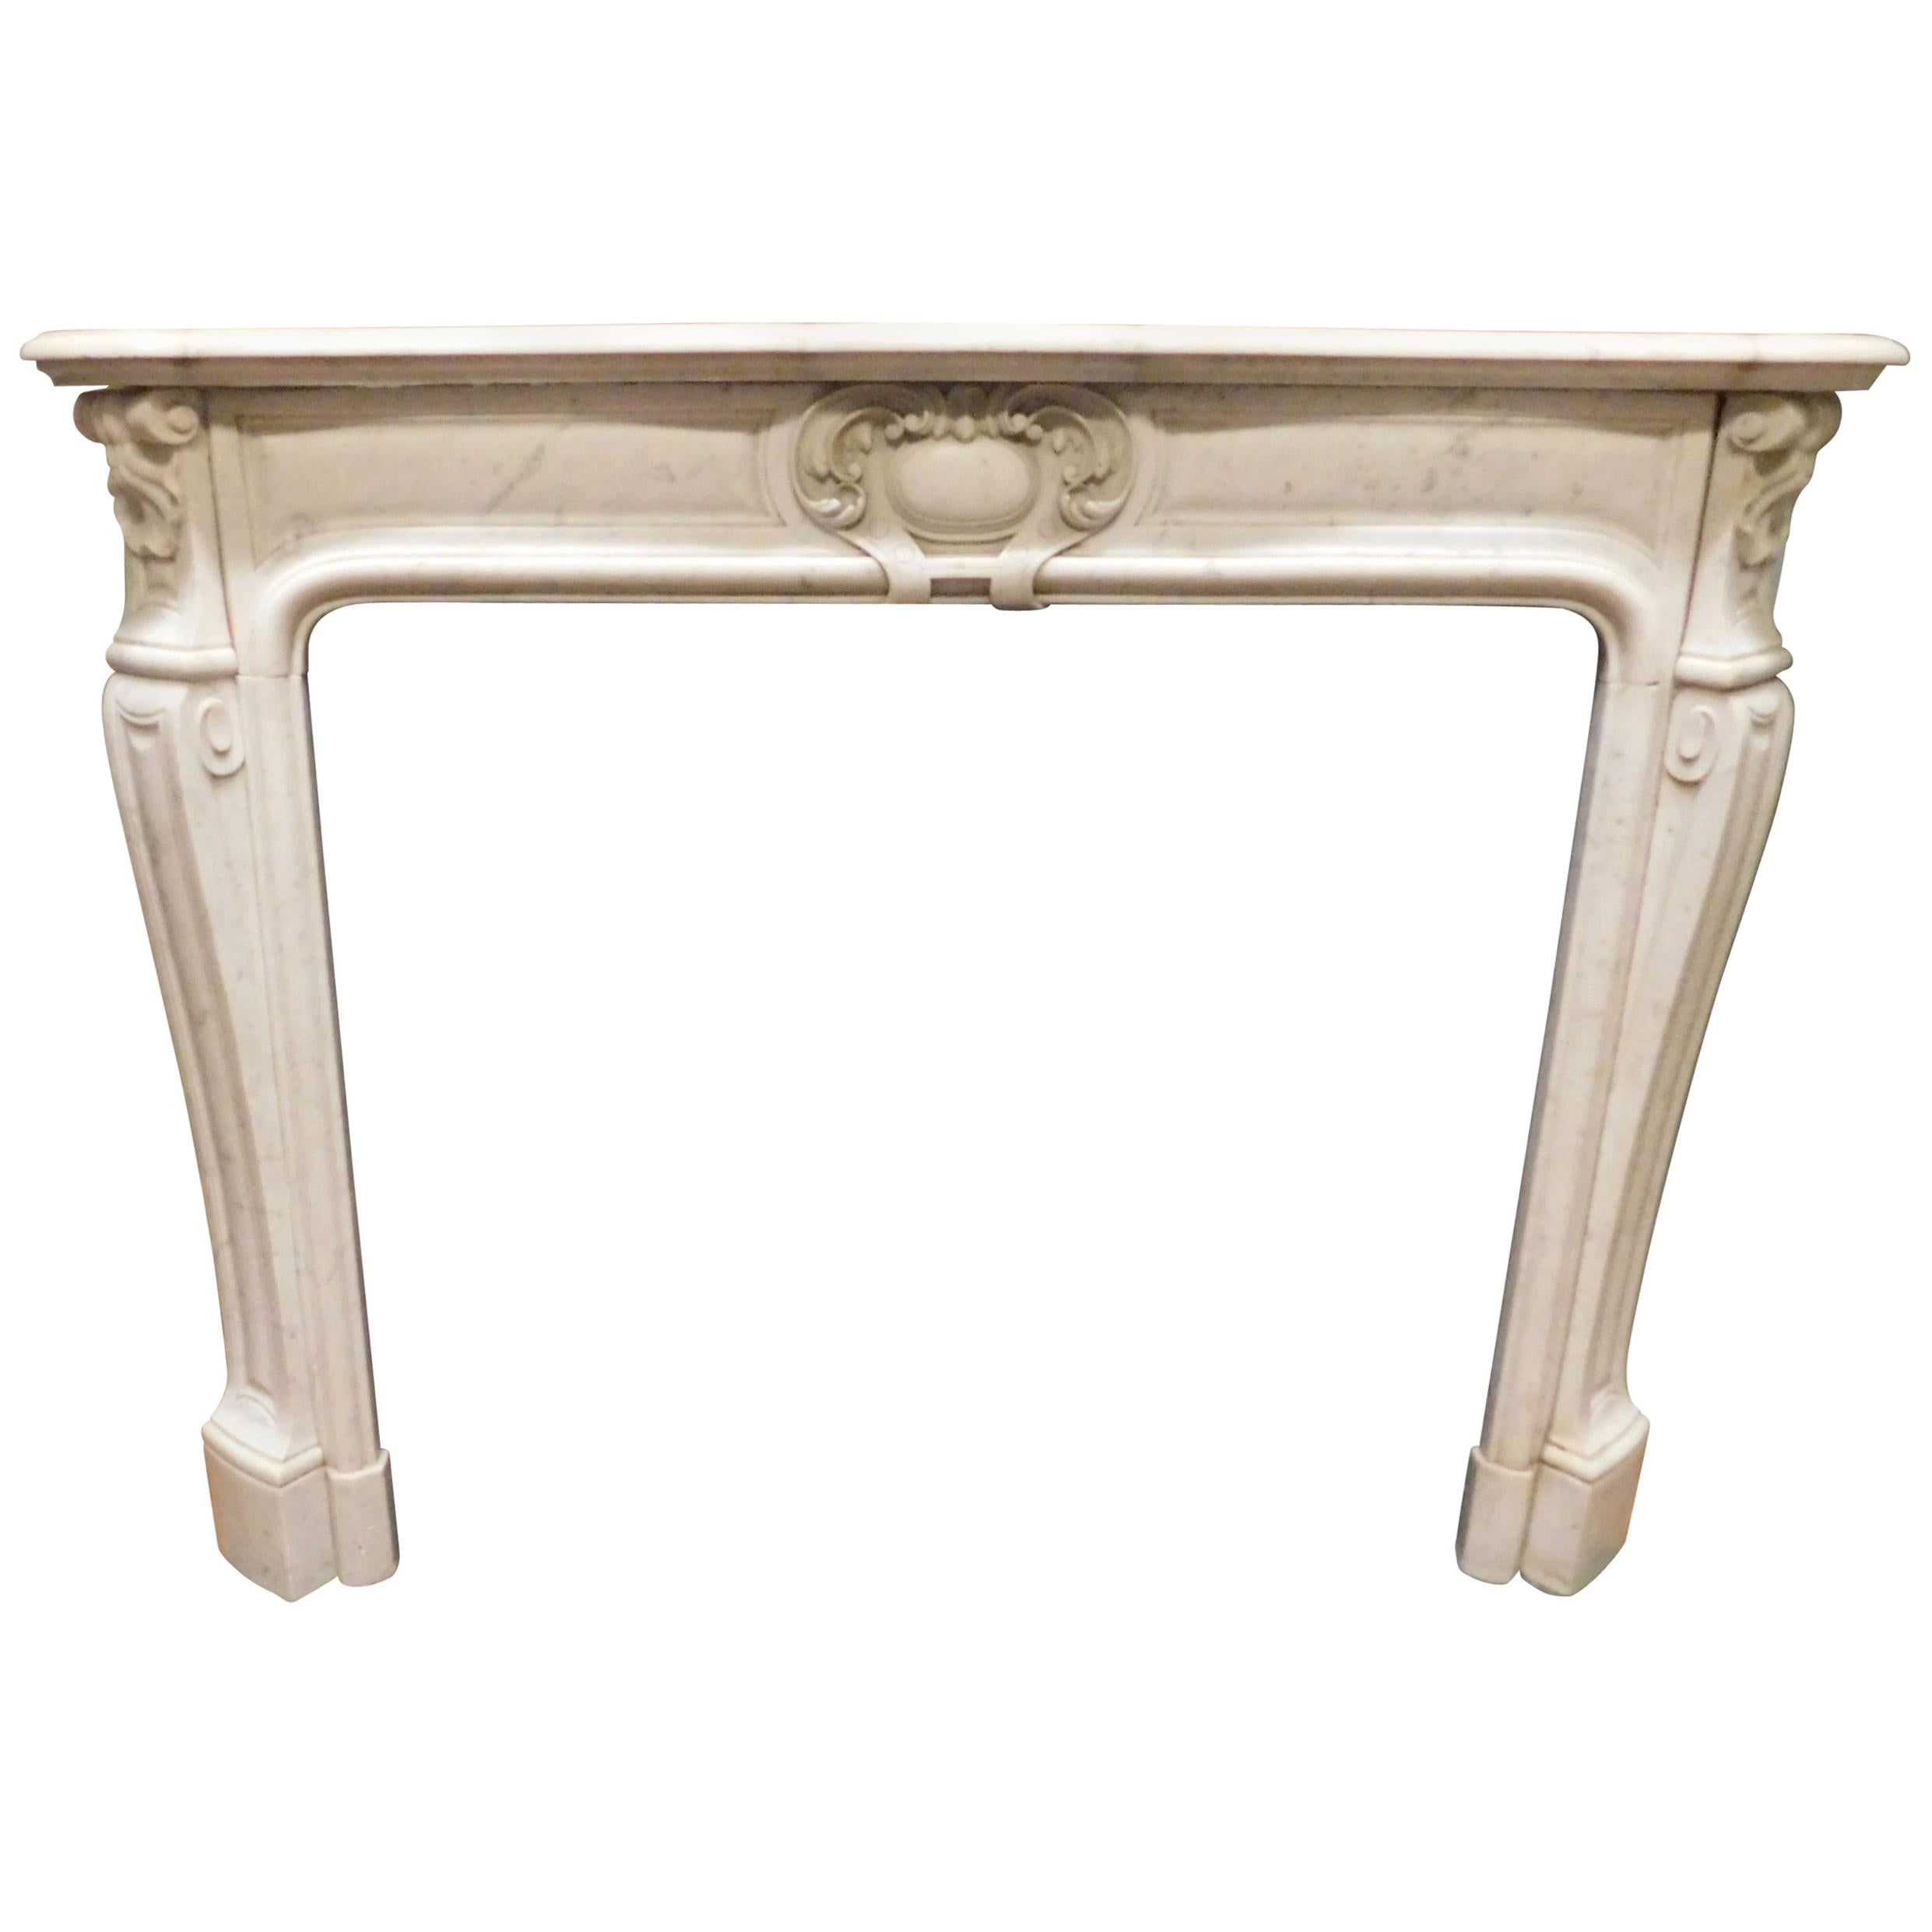 Antique White Carrara Marble Fireplace Mantel, 19th Century, Italy